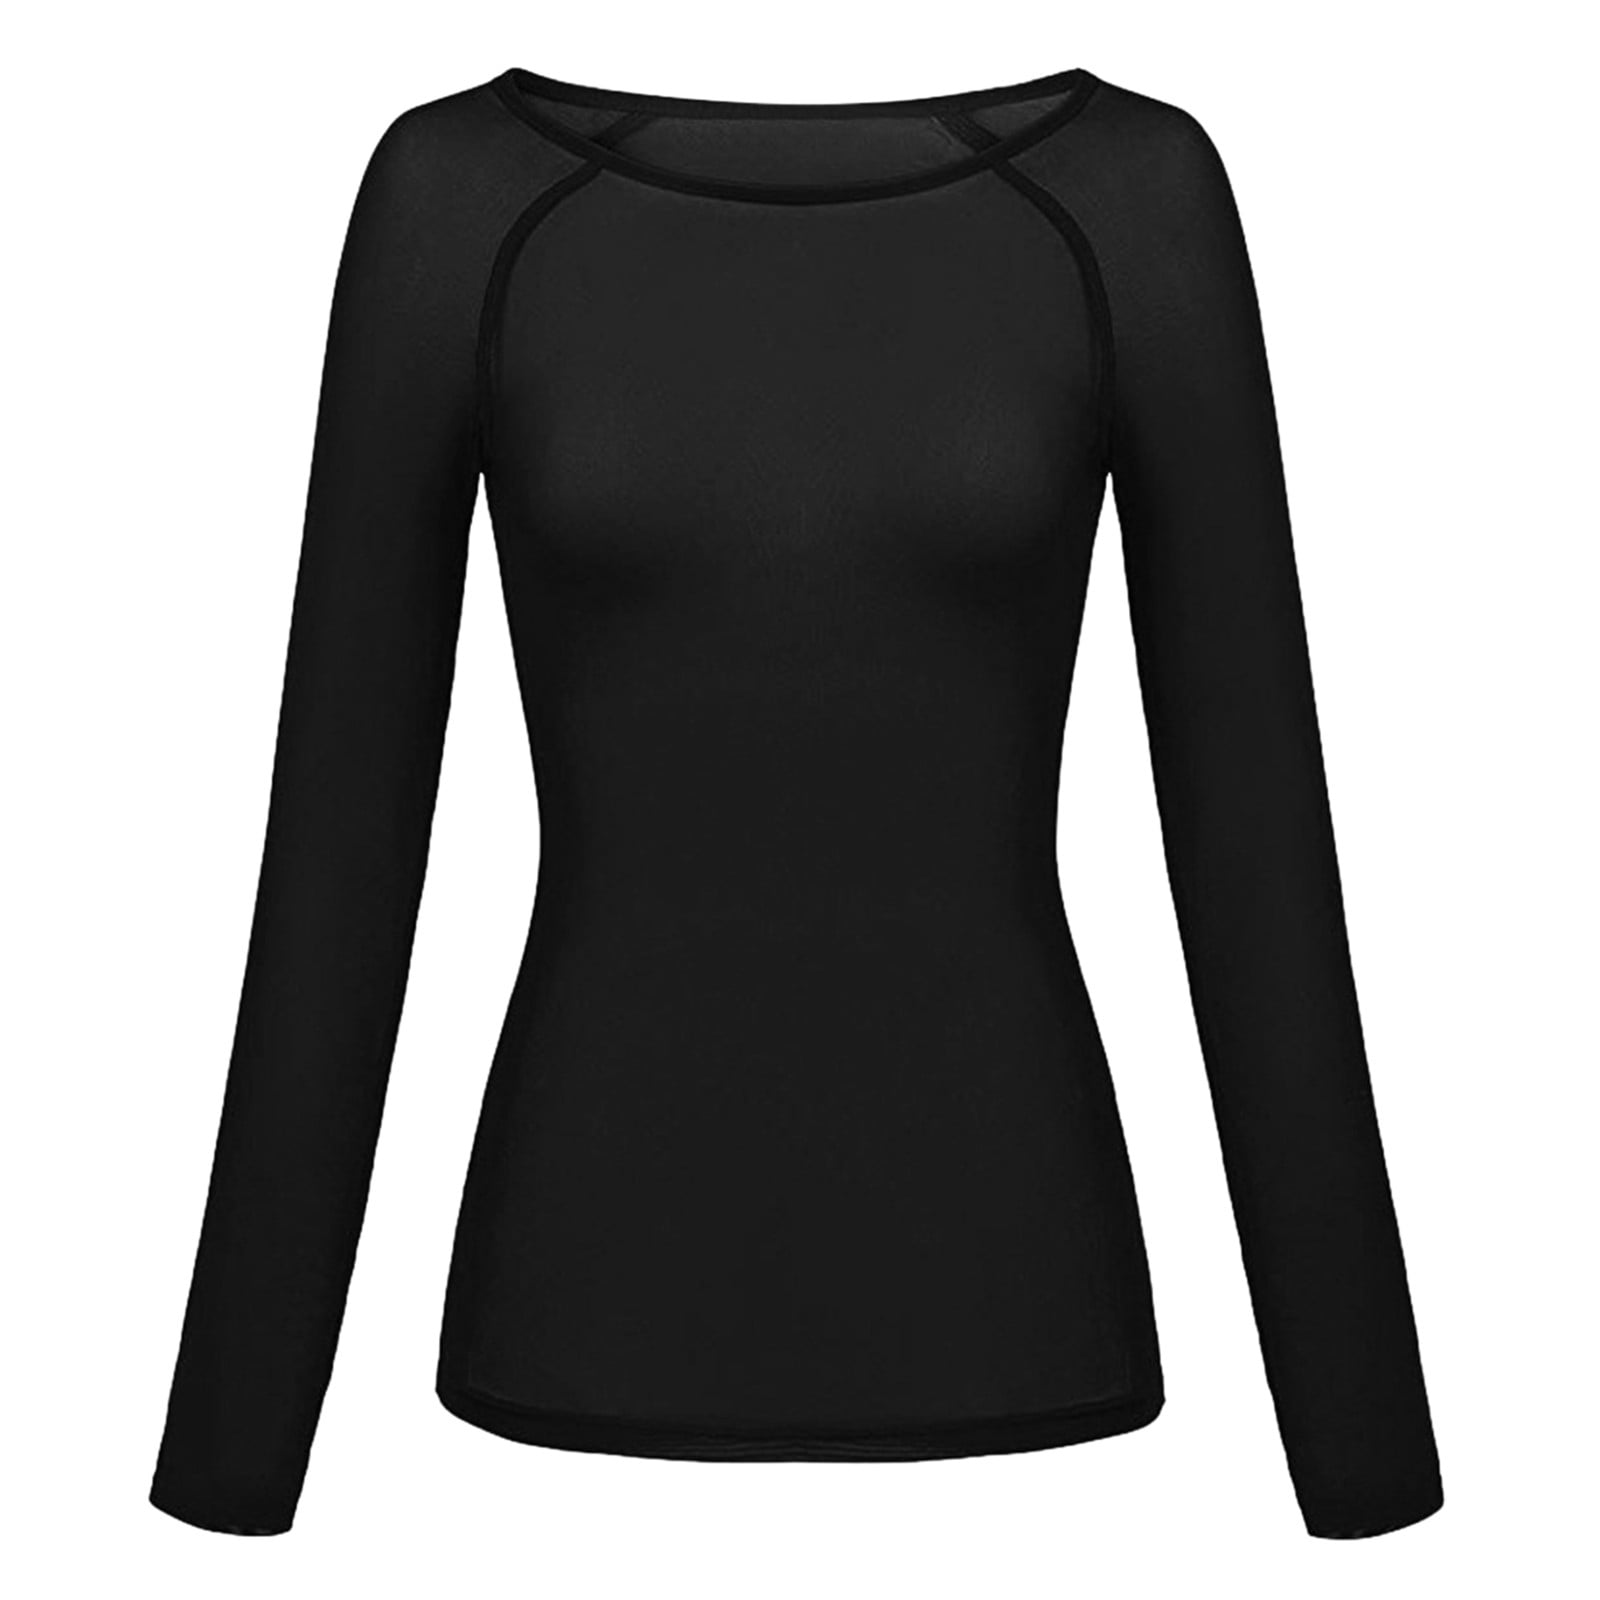 Tee Shirts for Women Long Sleeve Crew Neck Tops Solid Print Black M ...